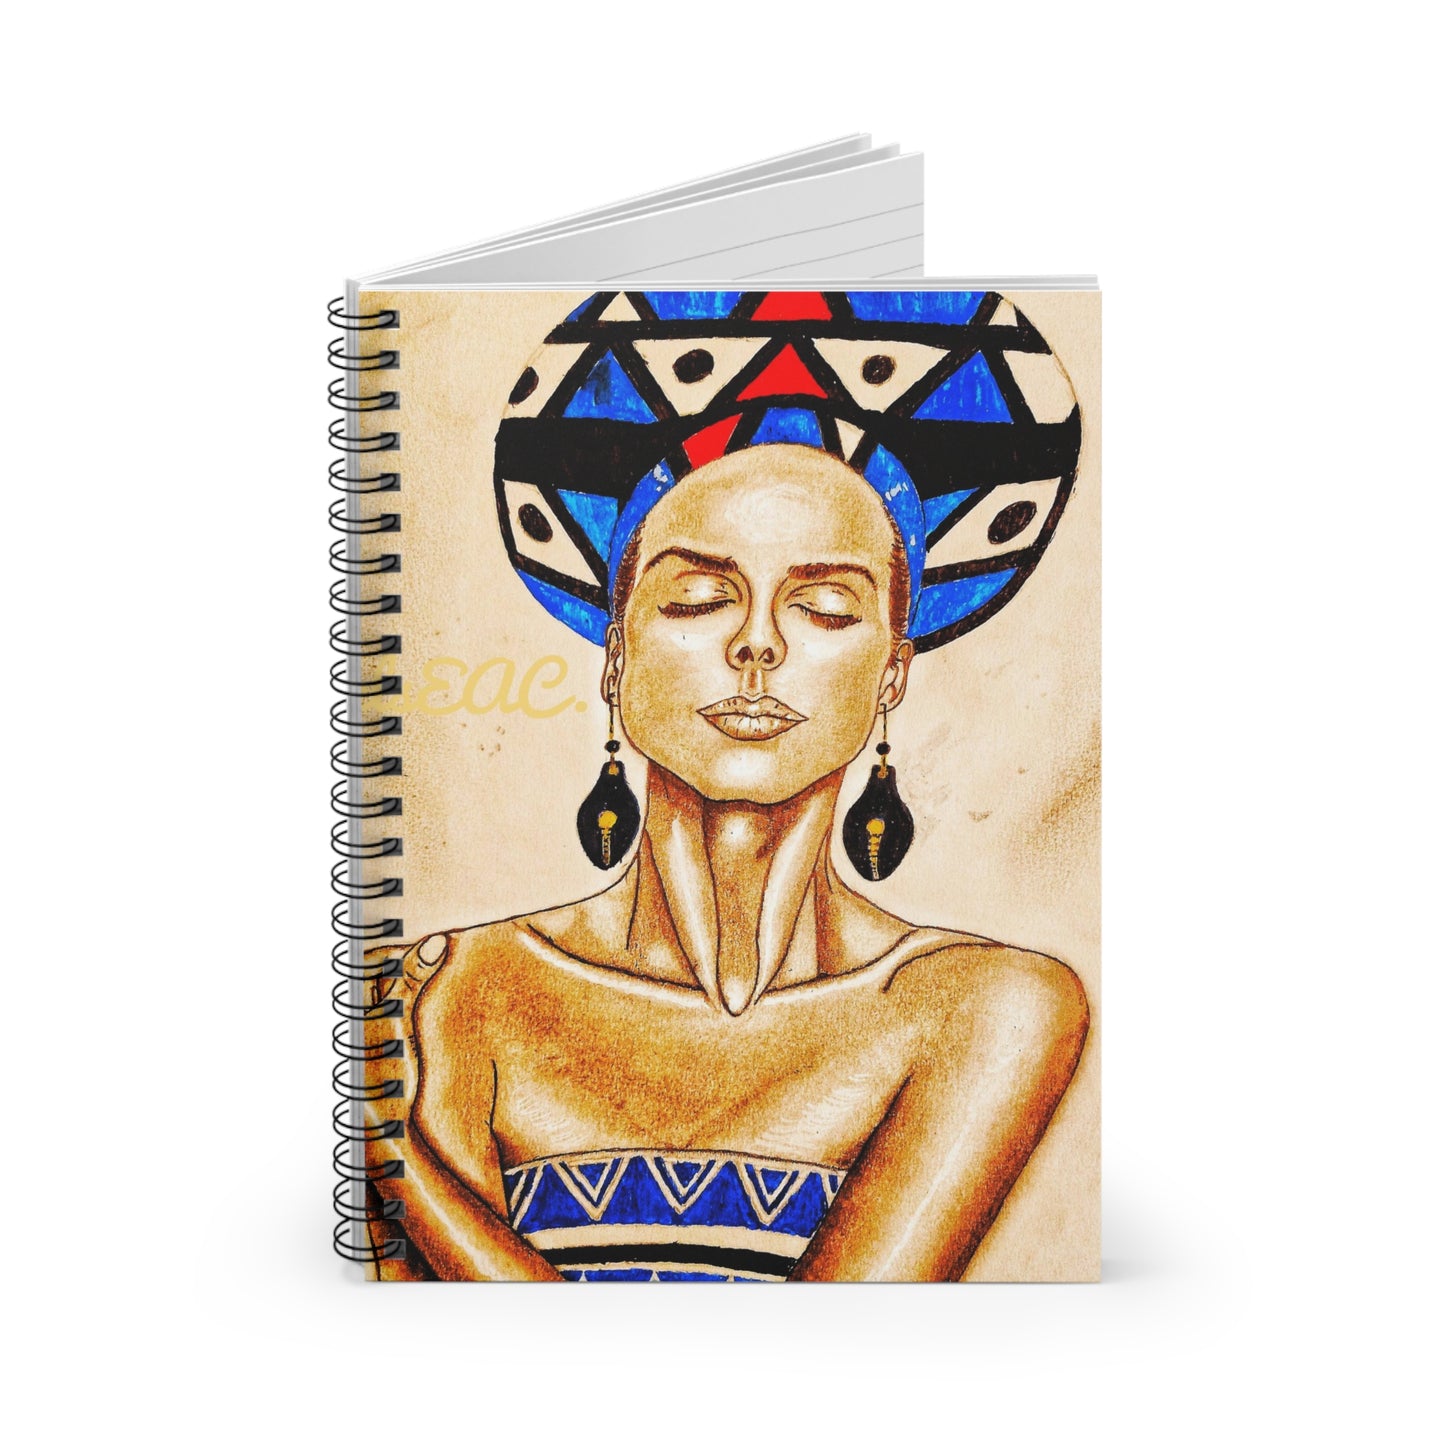 Drover Yellow Blue Spiral Notebook - Ruled Line